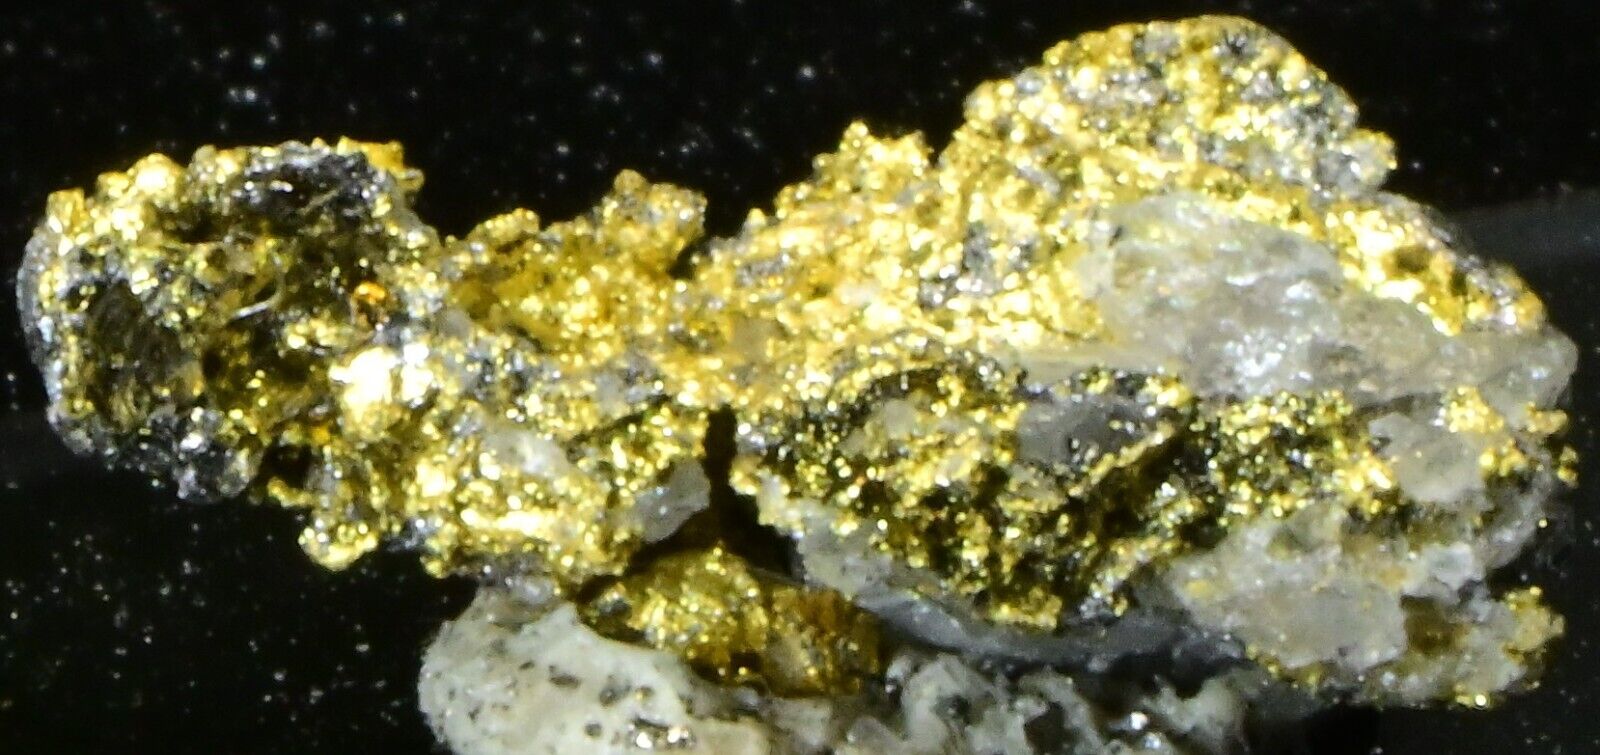 NATIVE GOLD 1.5 X 1 X 1 CM, 1G OF GOLD, RED LAKE, ONTARIO, CANADA #16